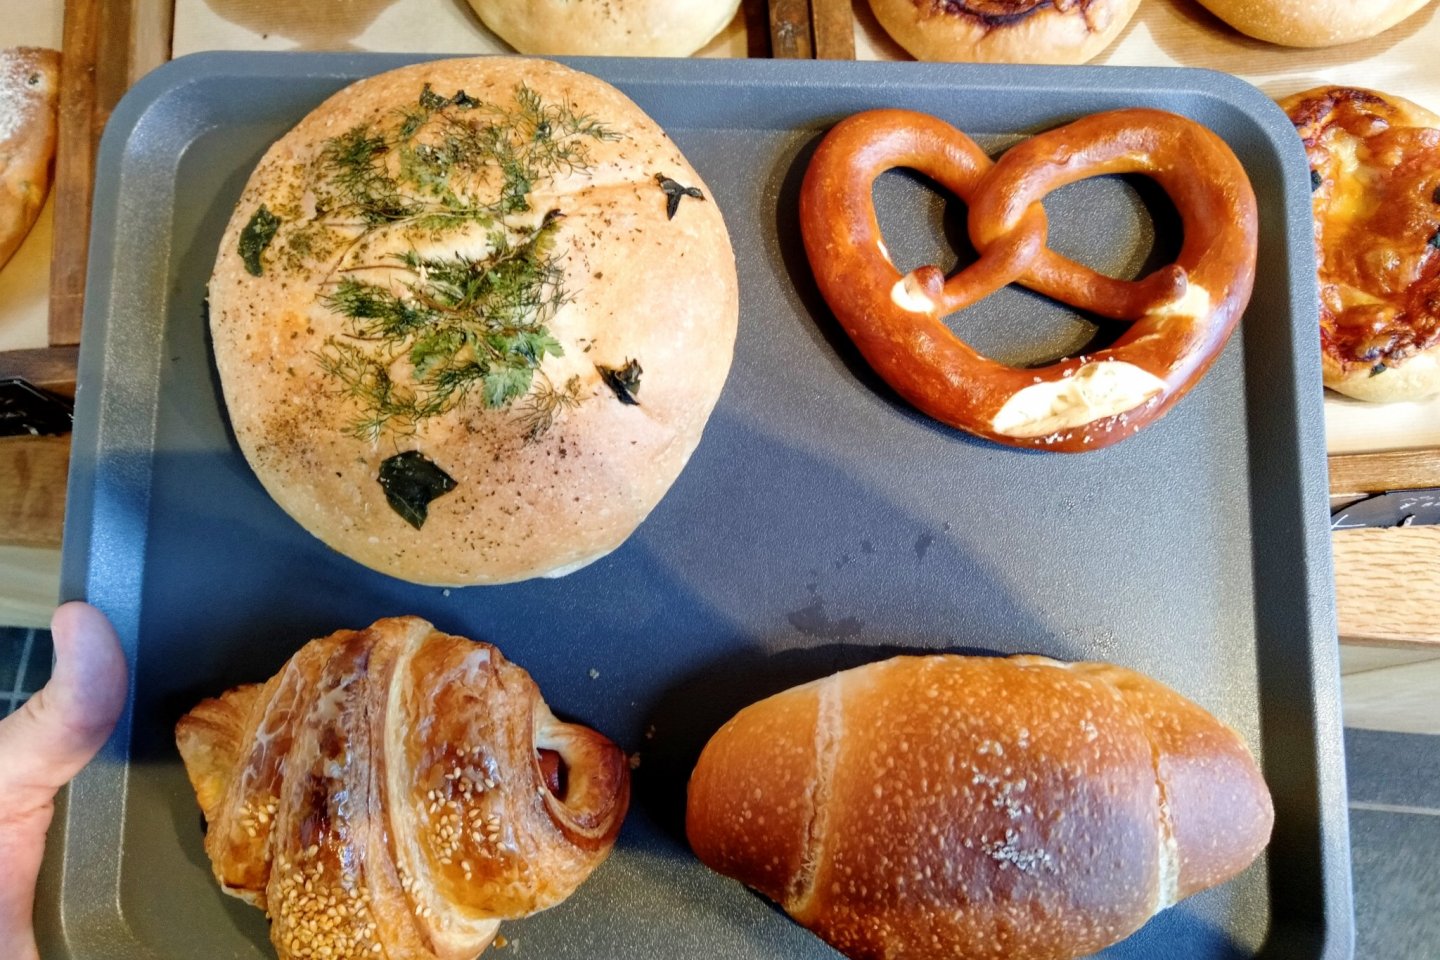 My bread haul for the trip: herb roll, pretzel, sausage croissant, and \